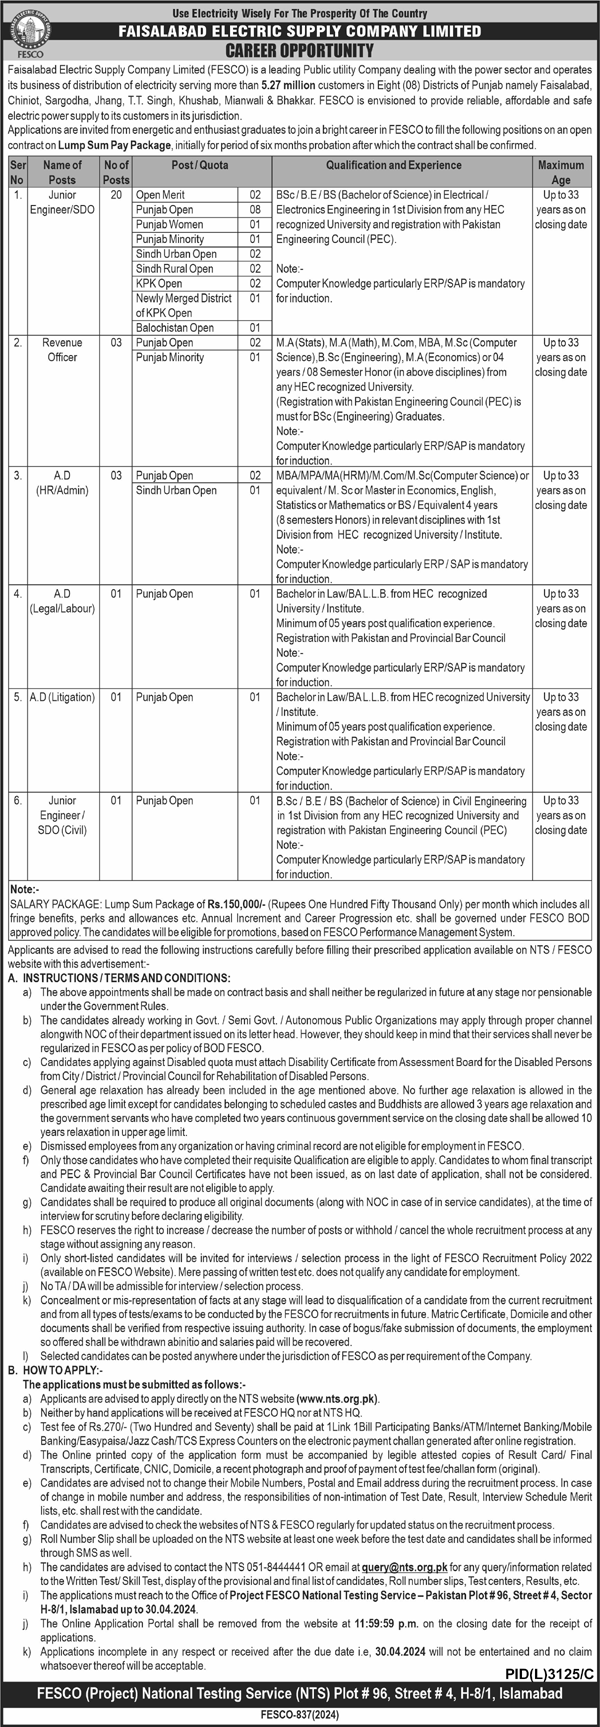 FAISALABAD ELECTRIC SUPPLY COMPANY LIMITED CAREER OPPORTUNITY